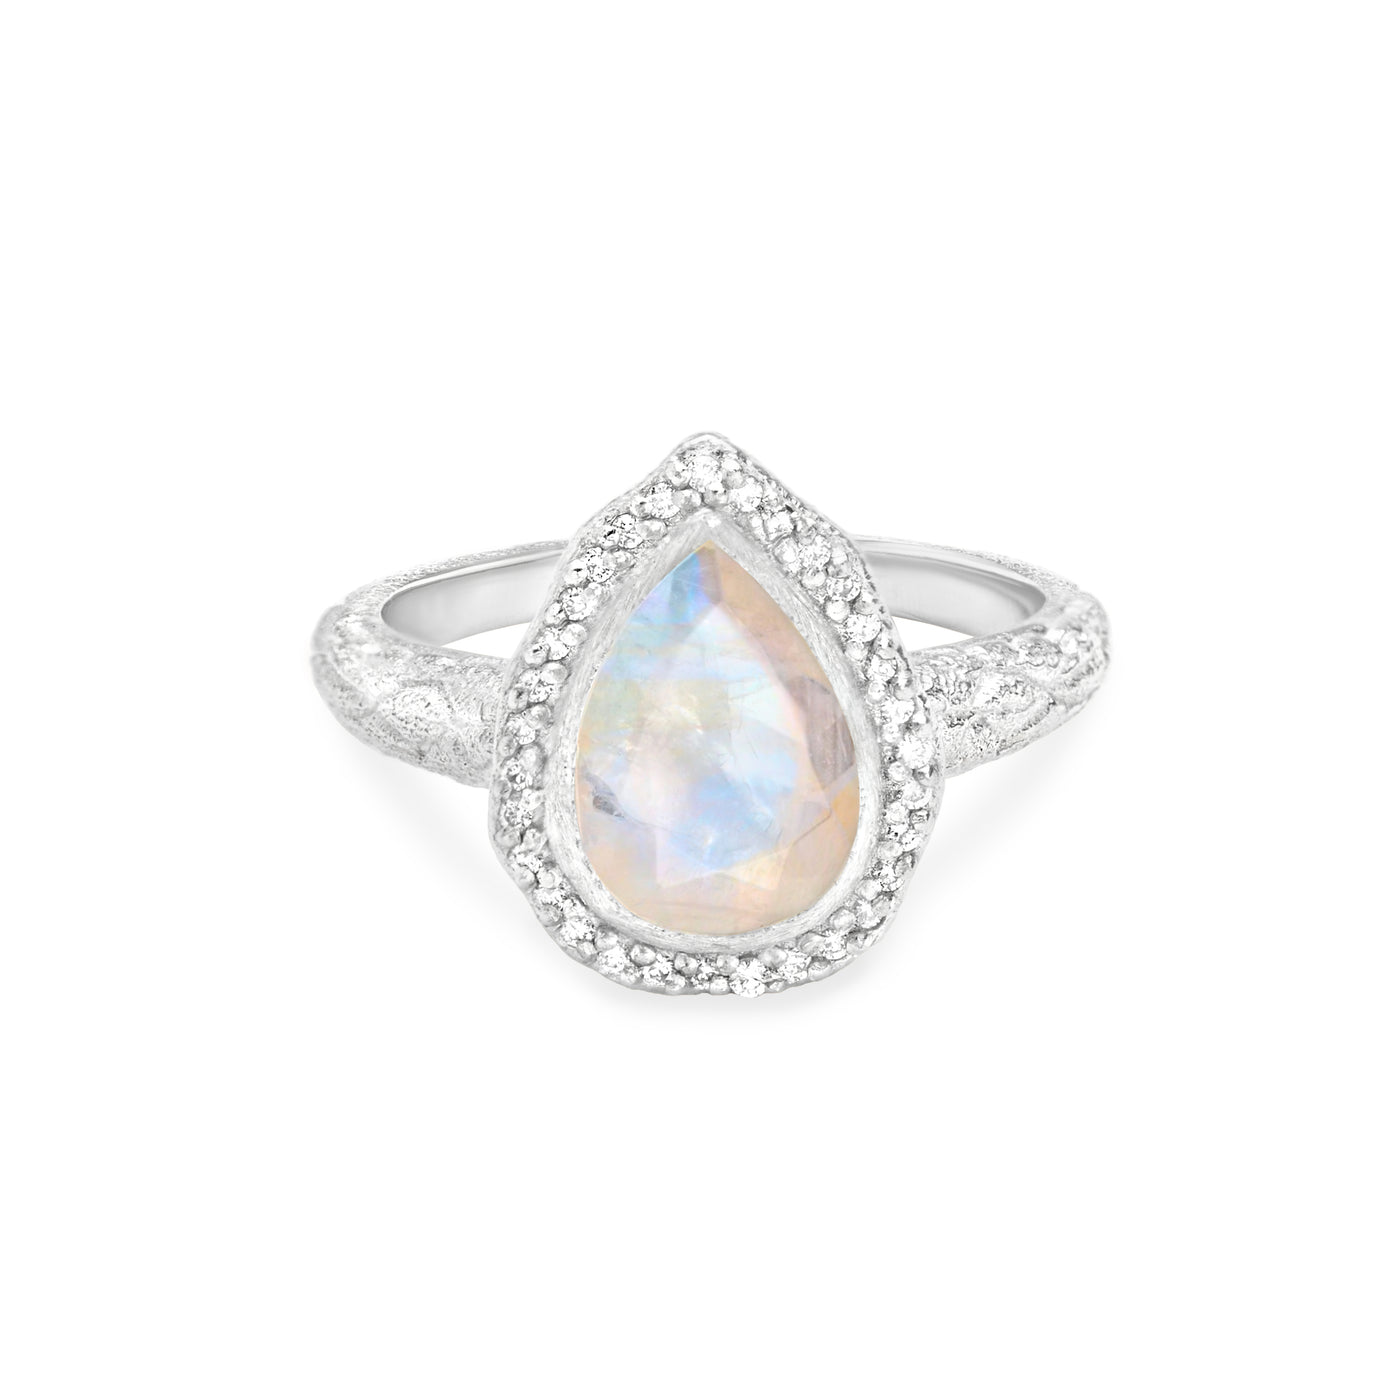 14 Karat White Gold Ring with Pear Shaped Moonstone with Halo of White Diamonds Against White Background